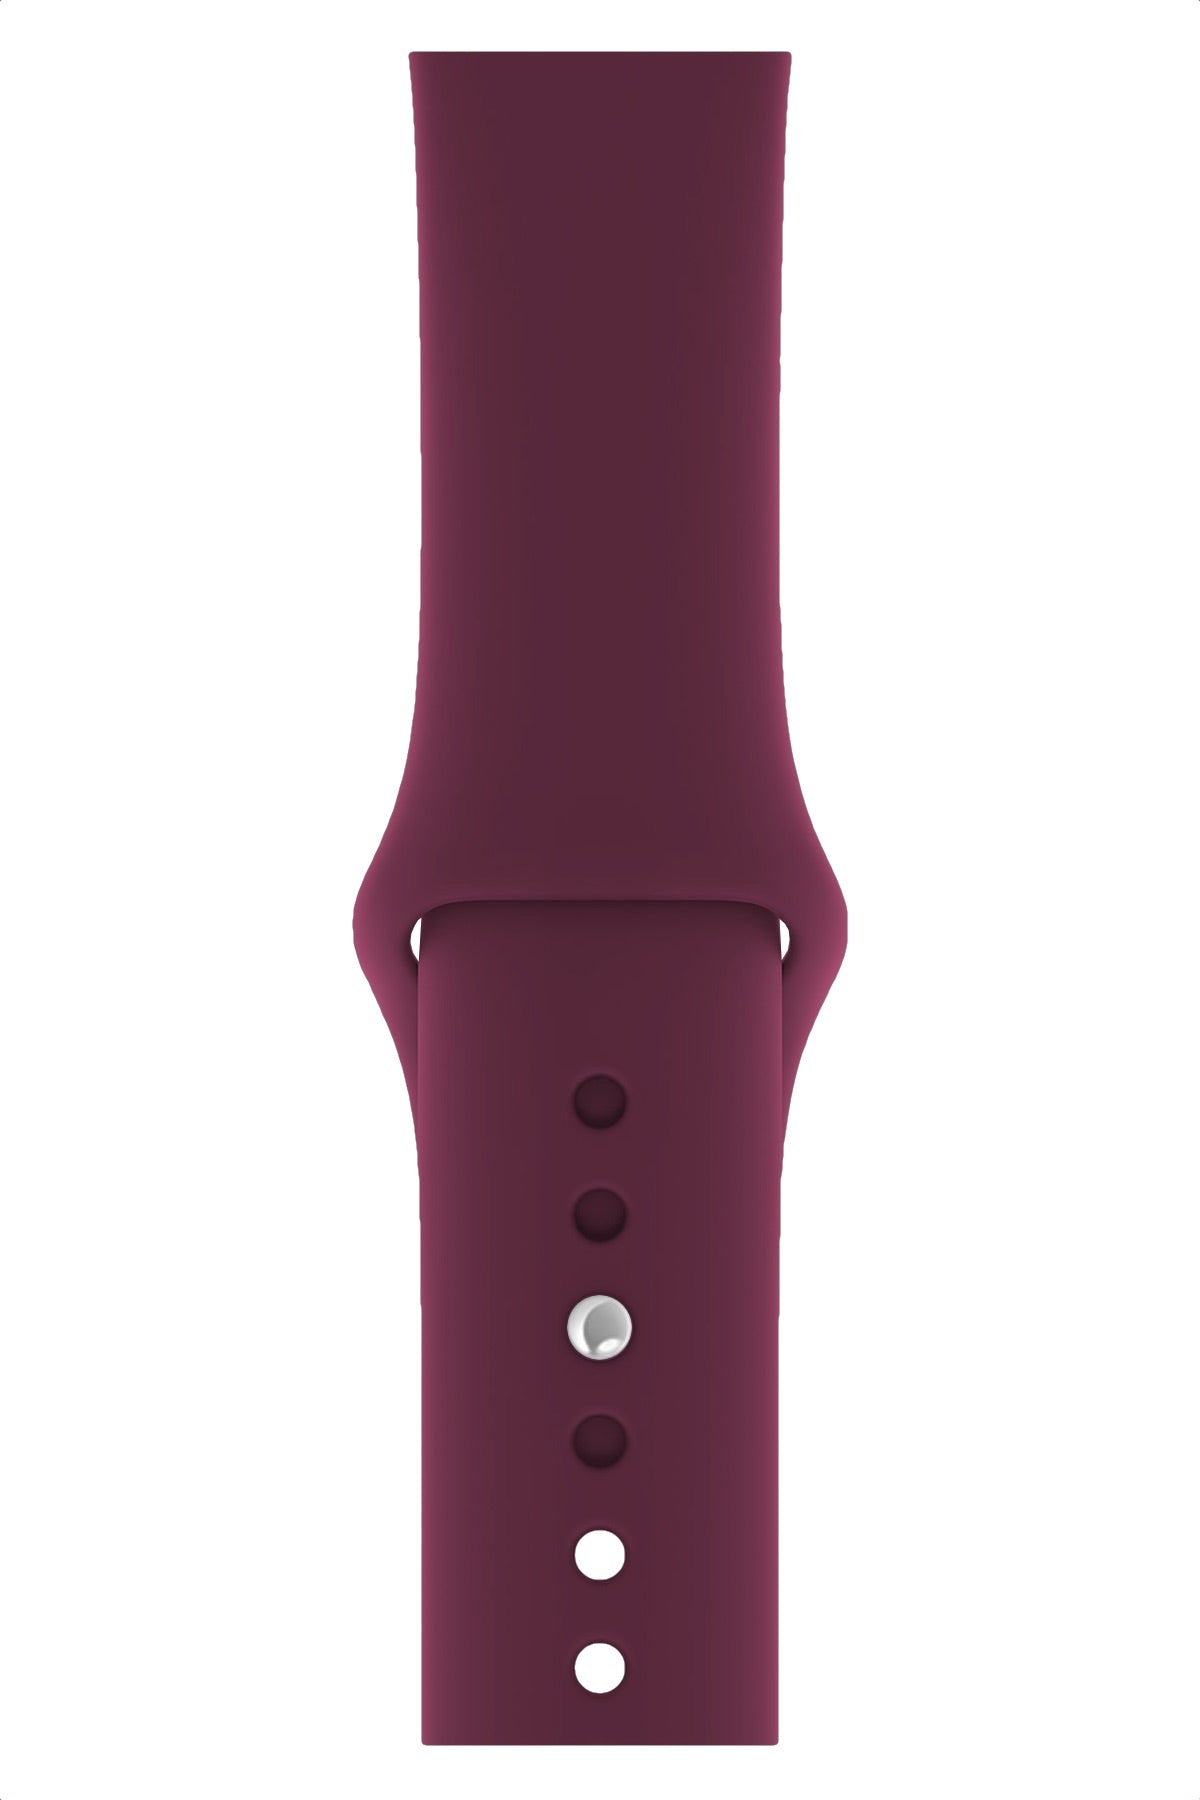 Apple Watch Compatible Silicone Sport Band Plum